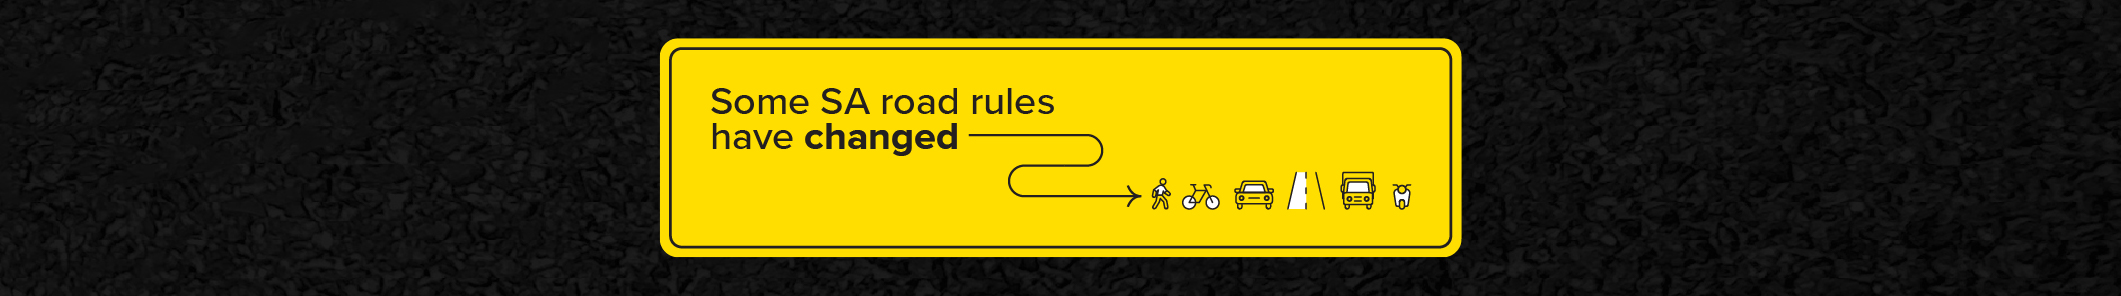 Some SA road rules have changed